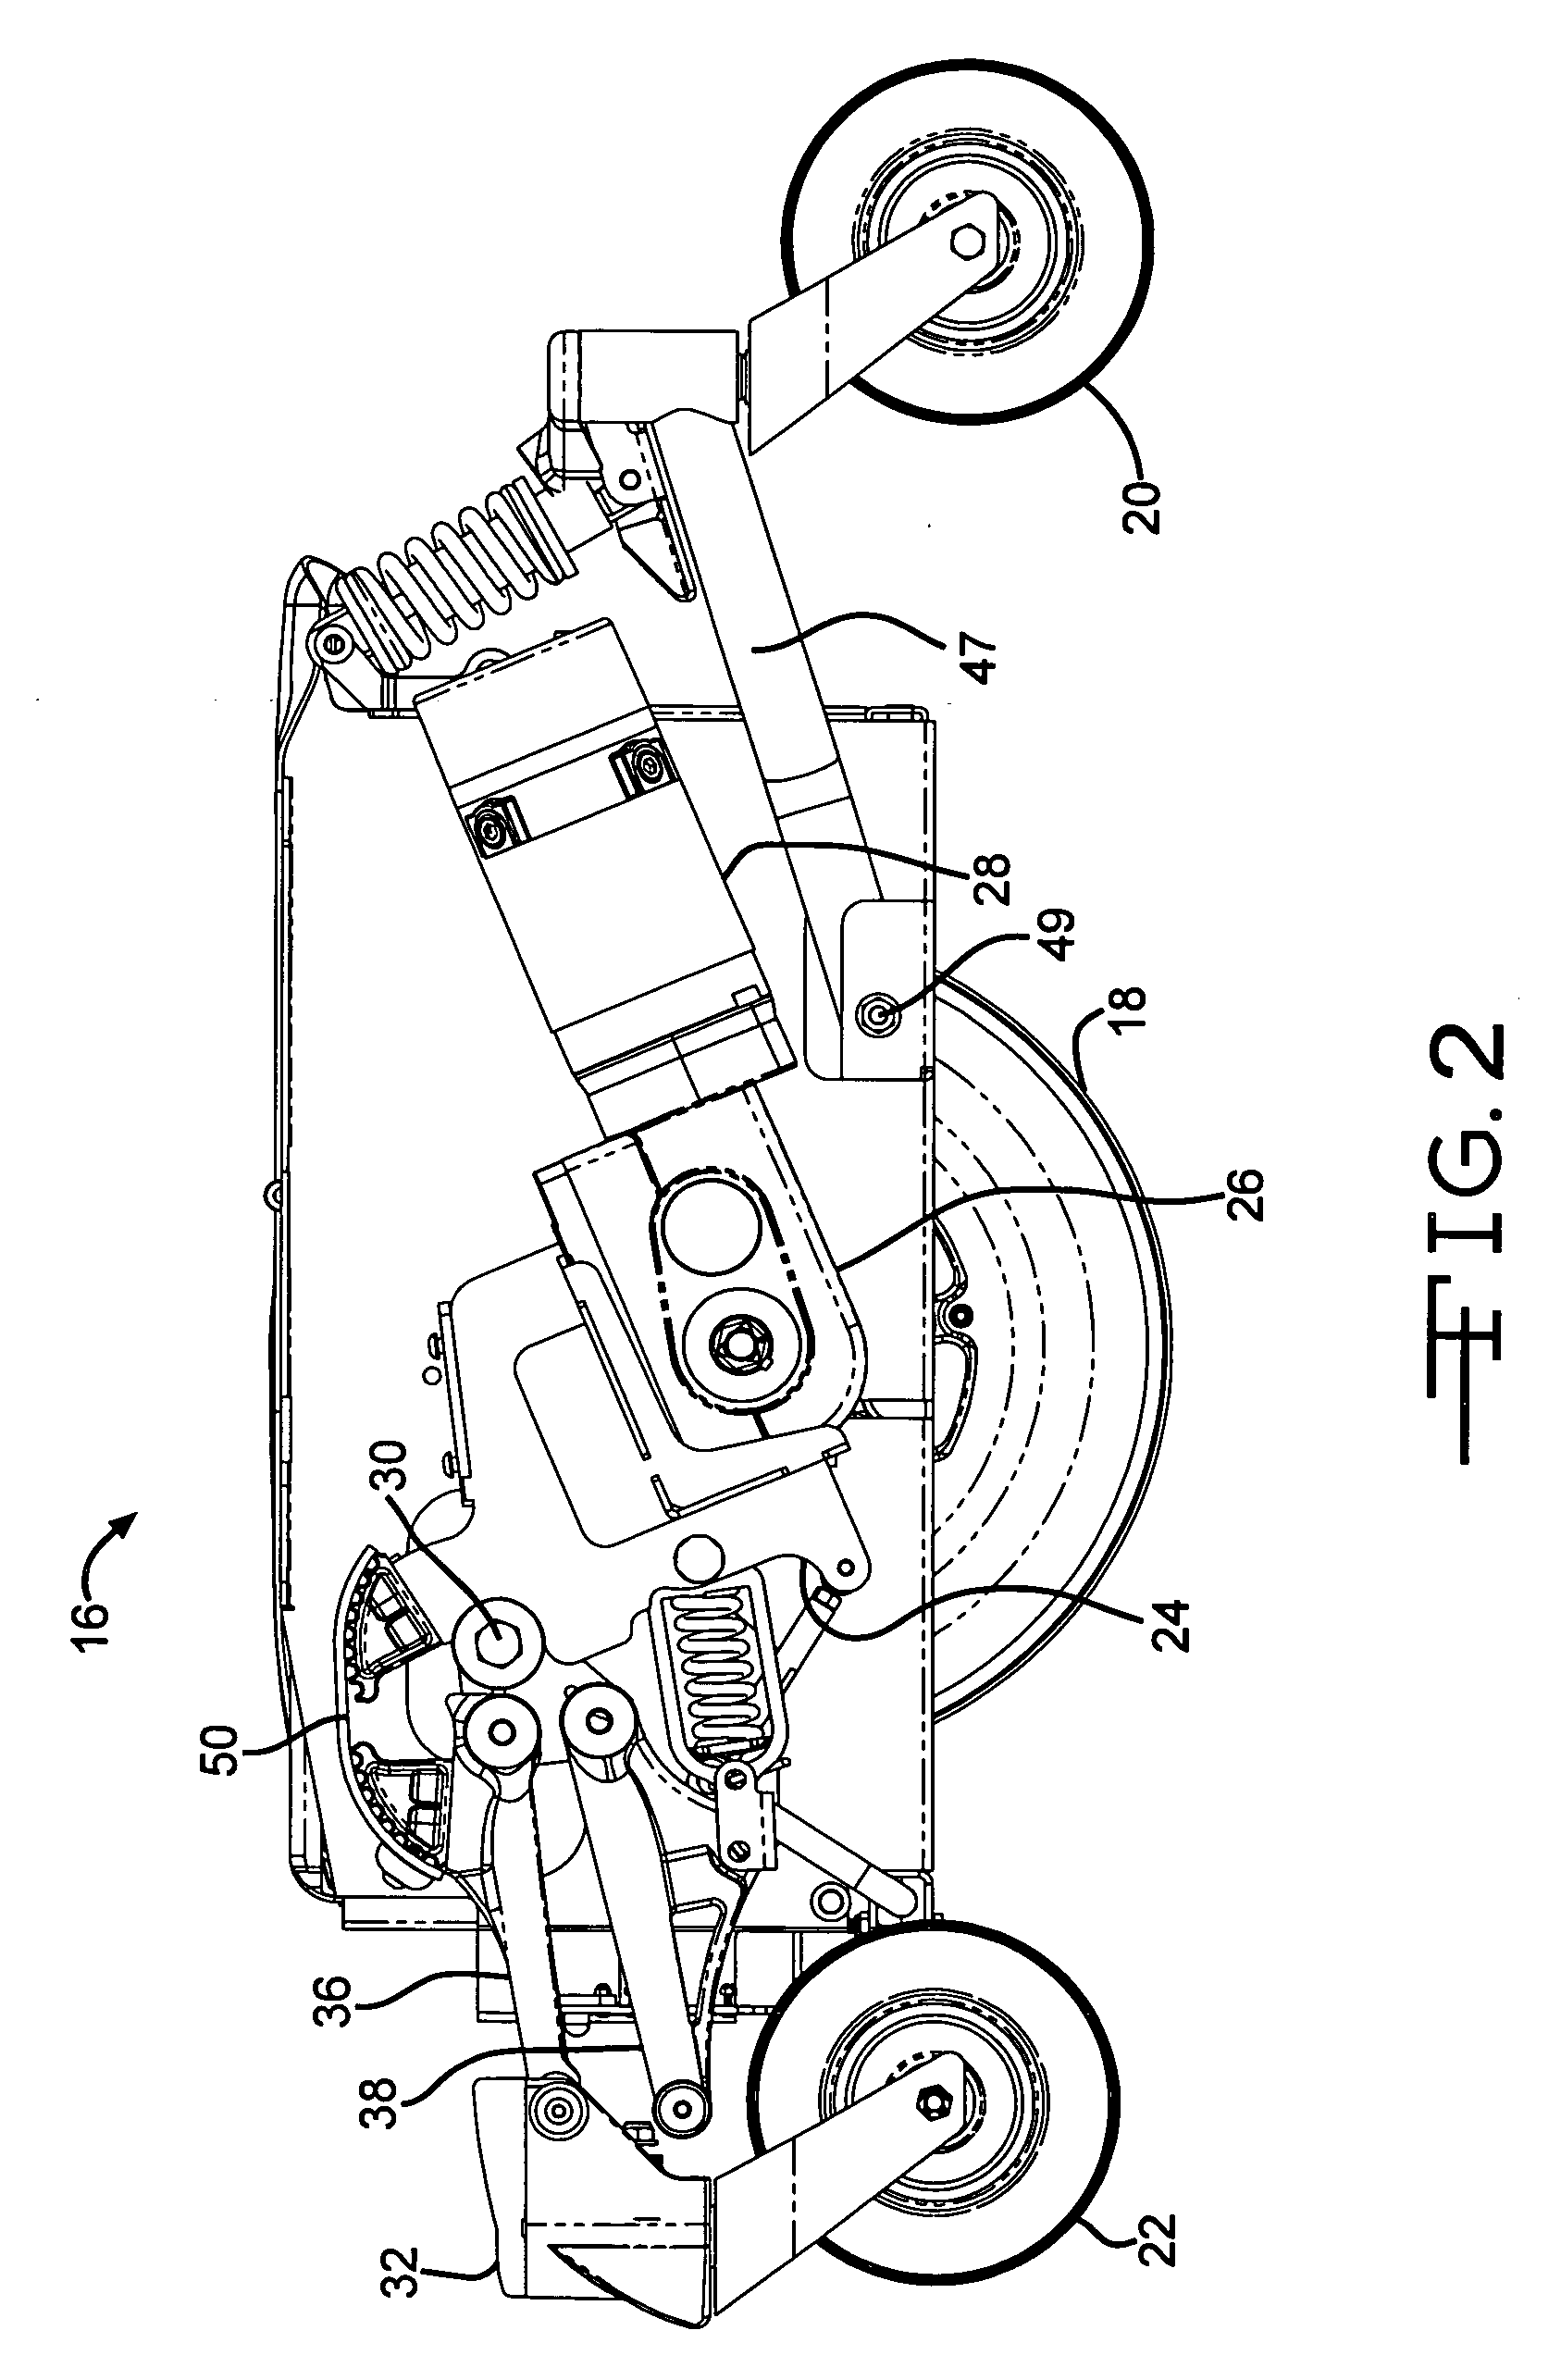 Wheelchair with damping mechanism